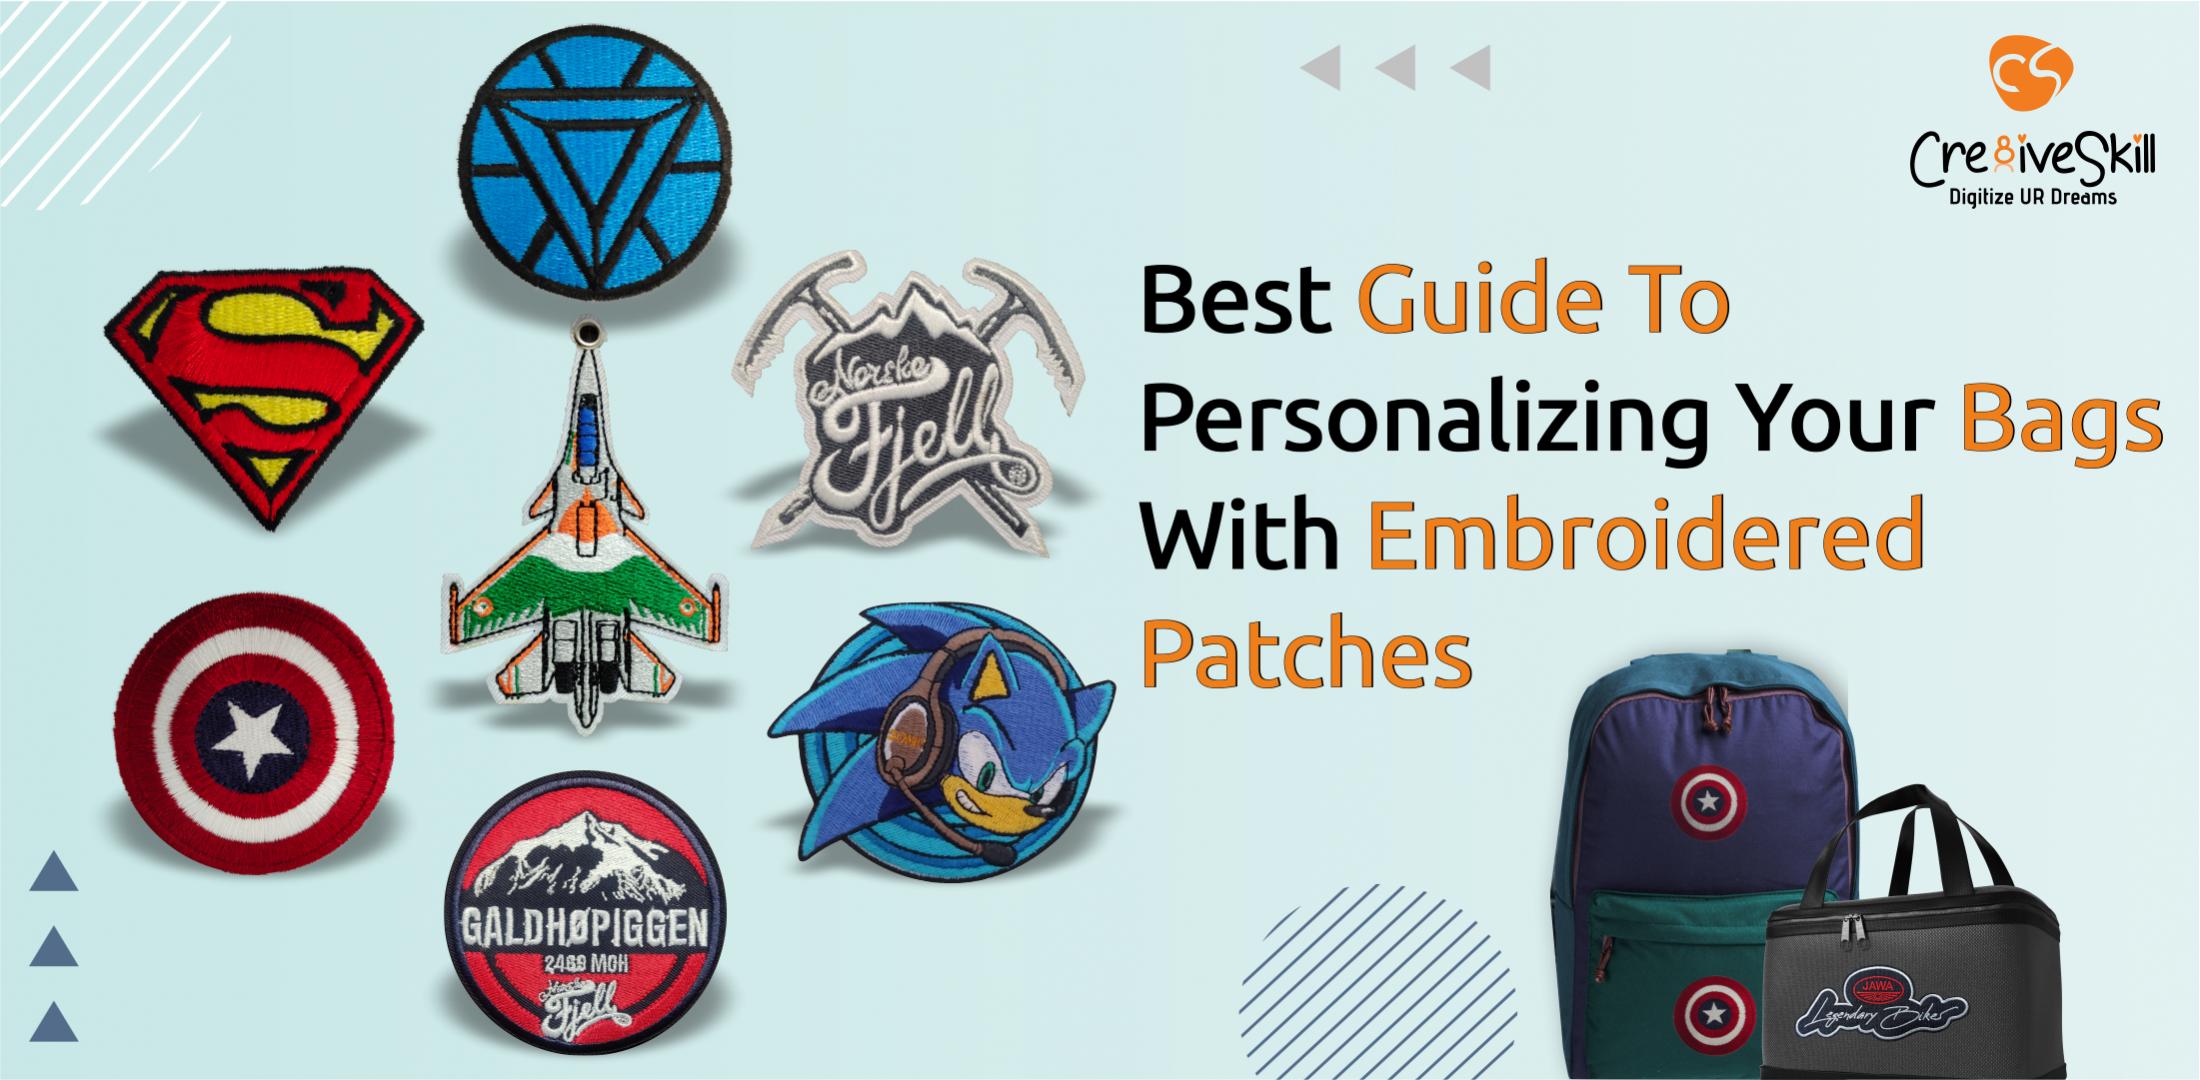 Personalize Your Bag And Backpacks With Embroidered Patches